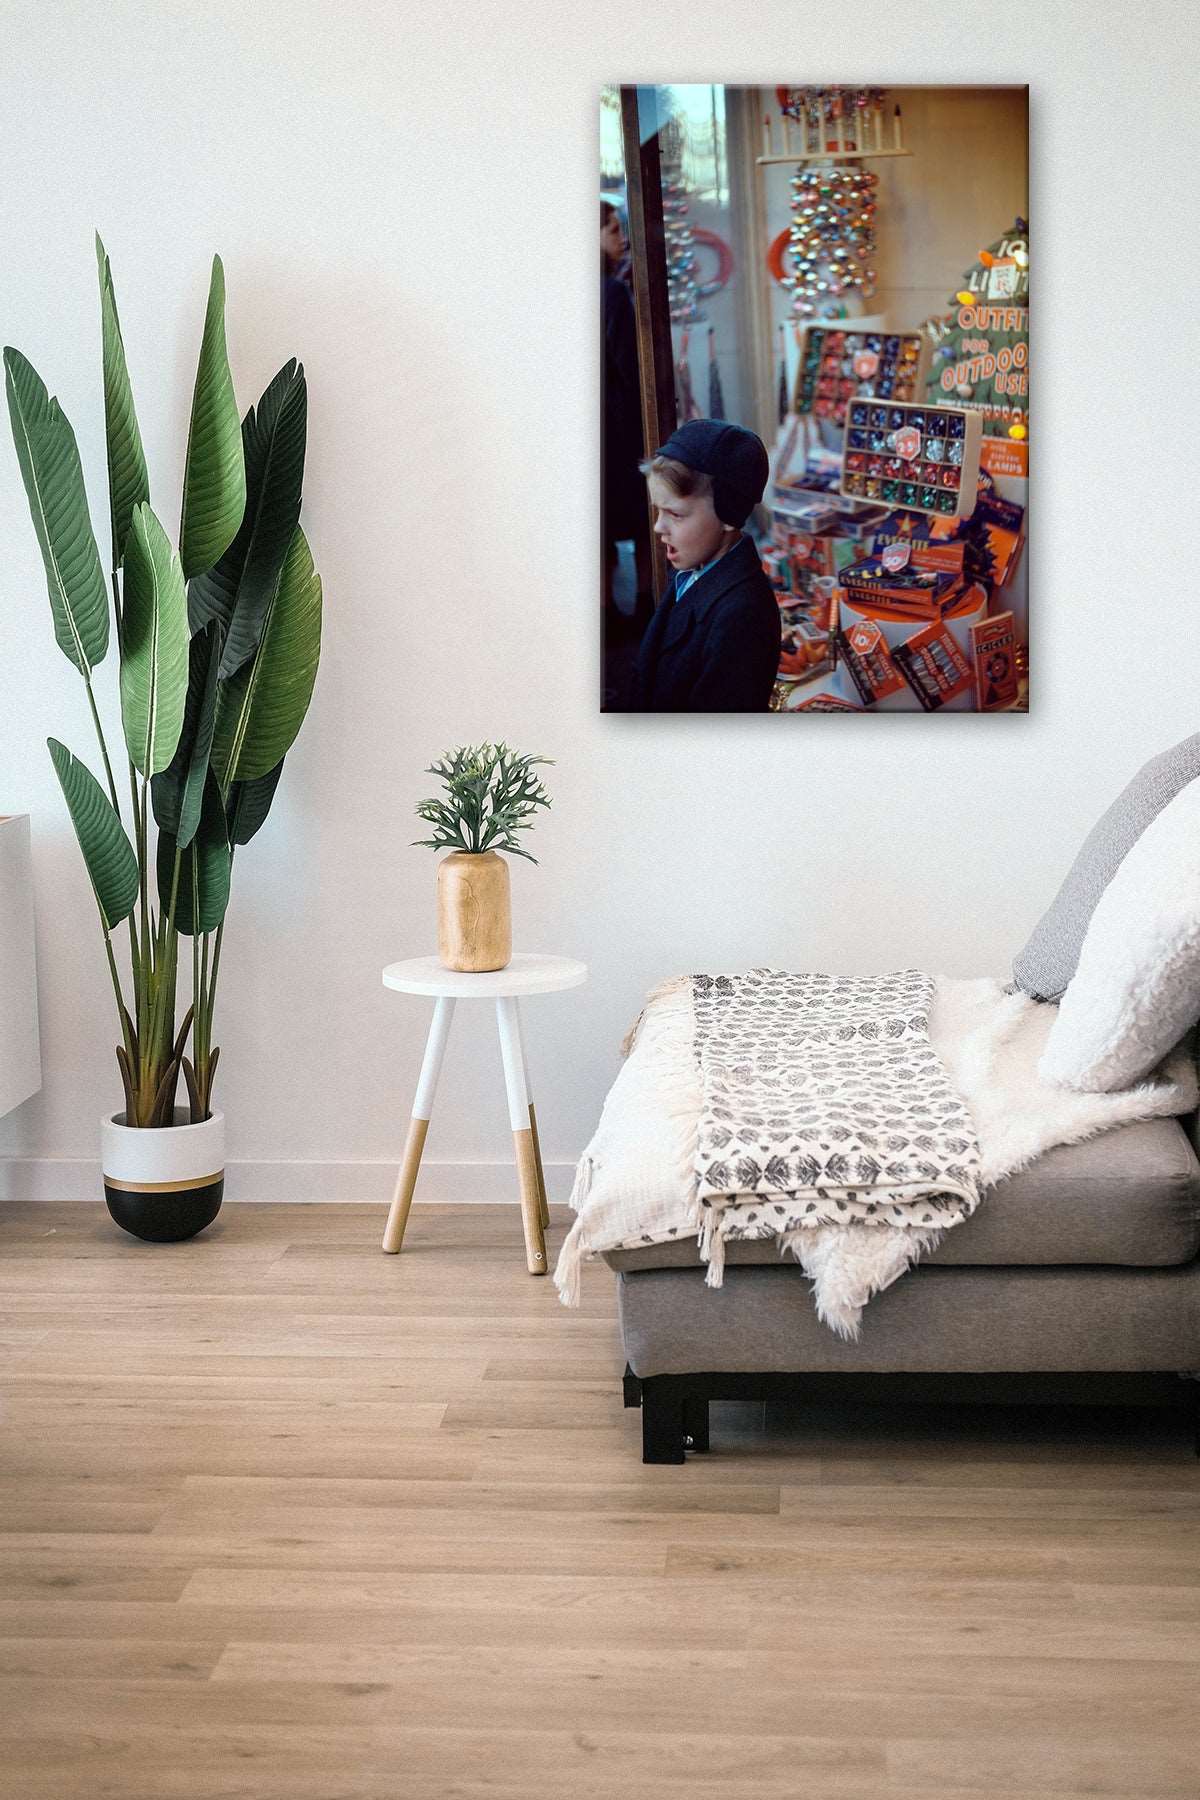 A canvas print of a vintage, color photograph hanging next to a plant in a living room